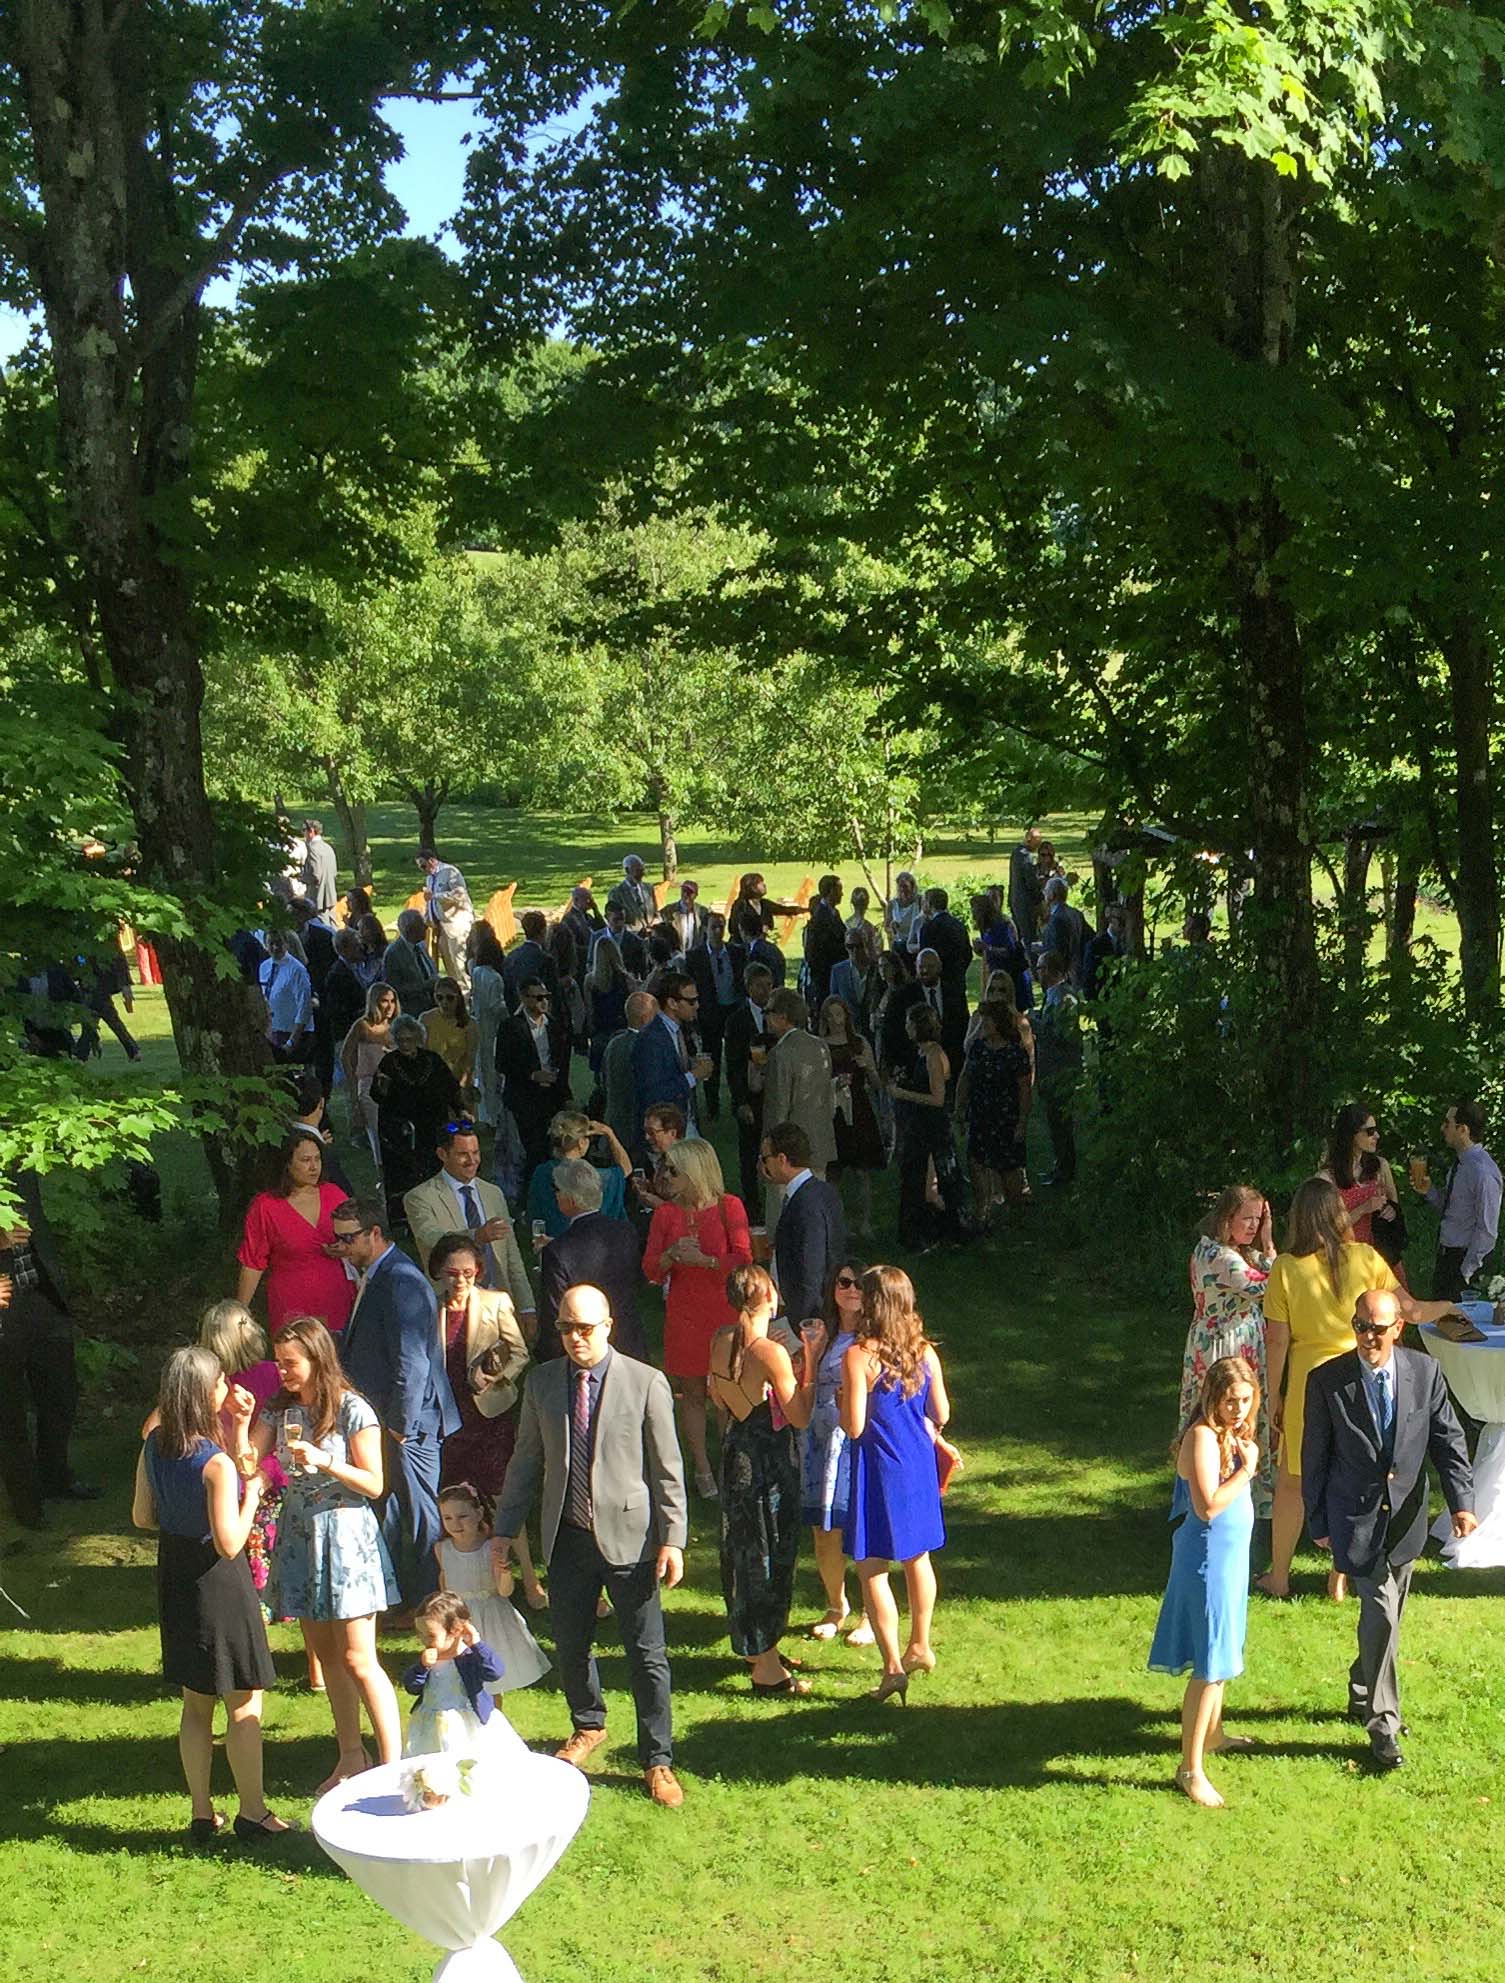 People gathered for cocktails outside the barn